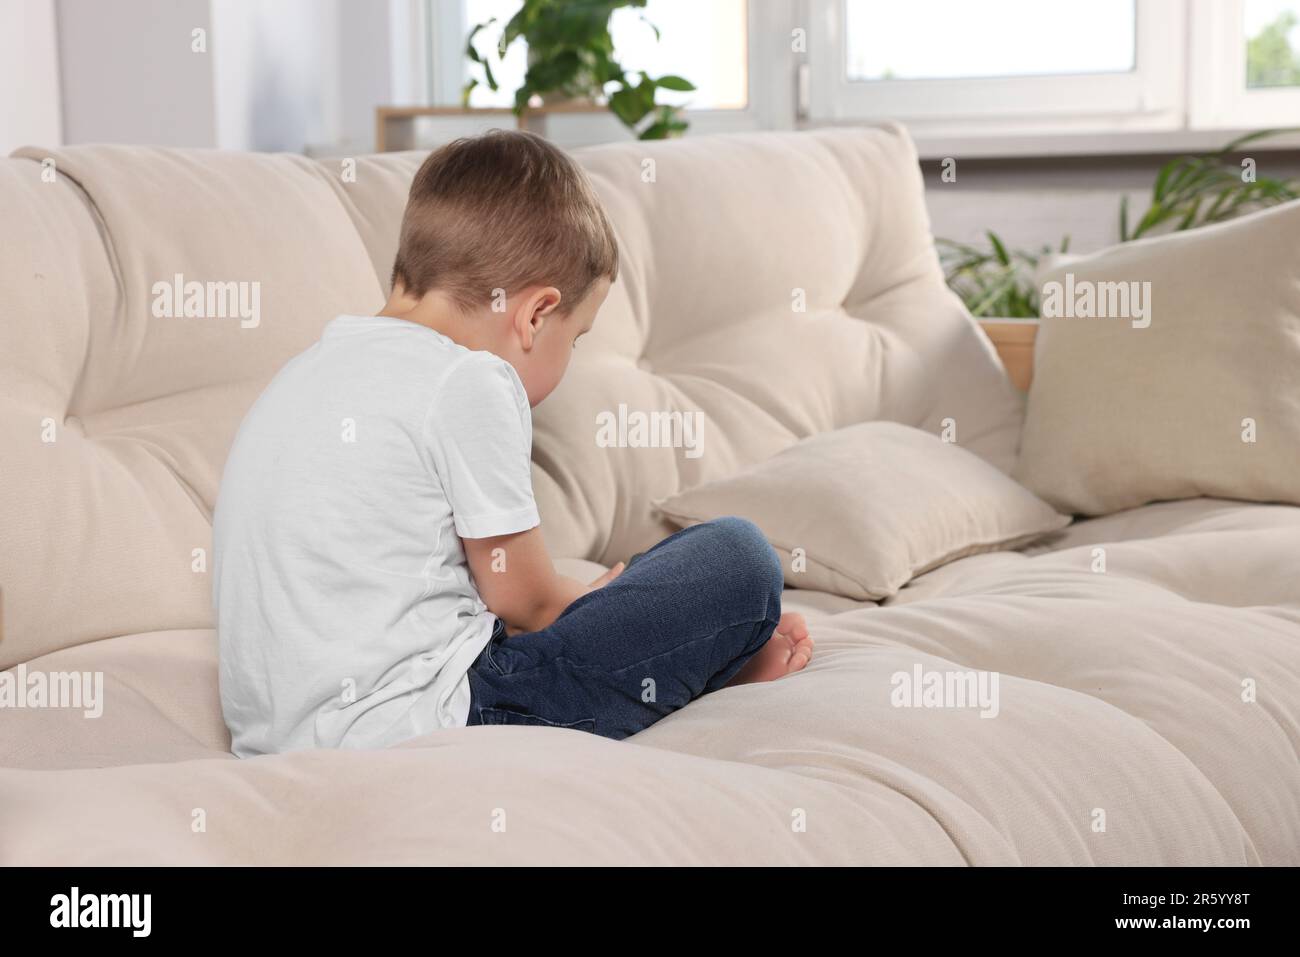 Boy with poor posture using phone on beige sofa in room. Symptom of scoliosis Stock Photo